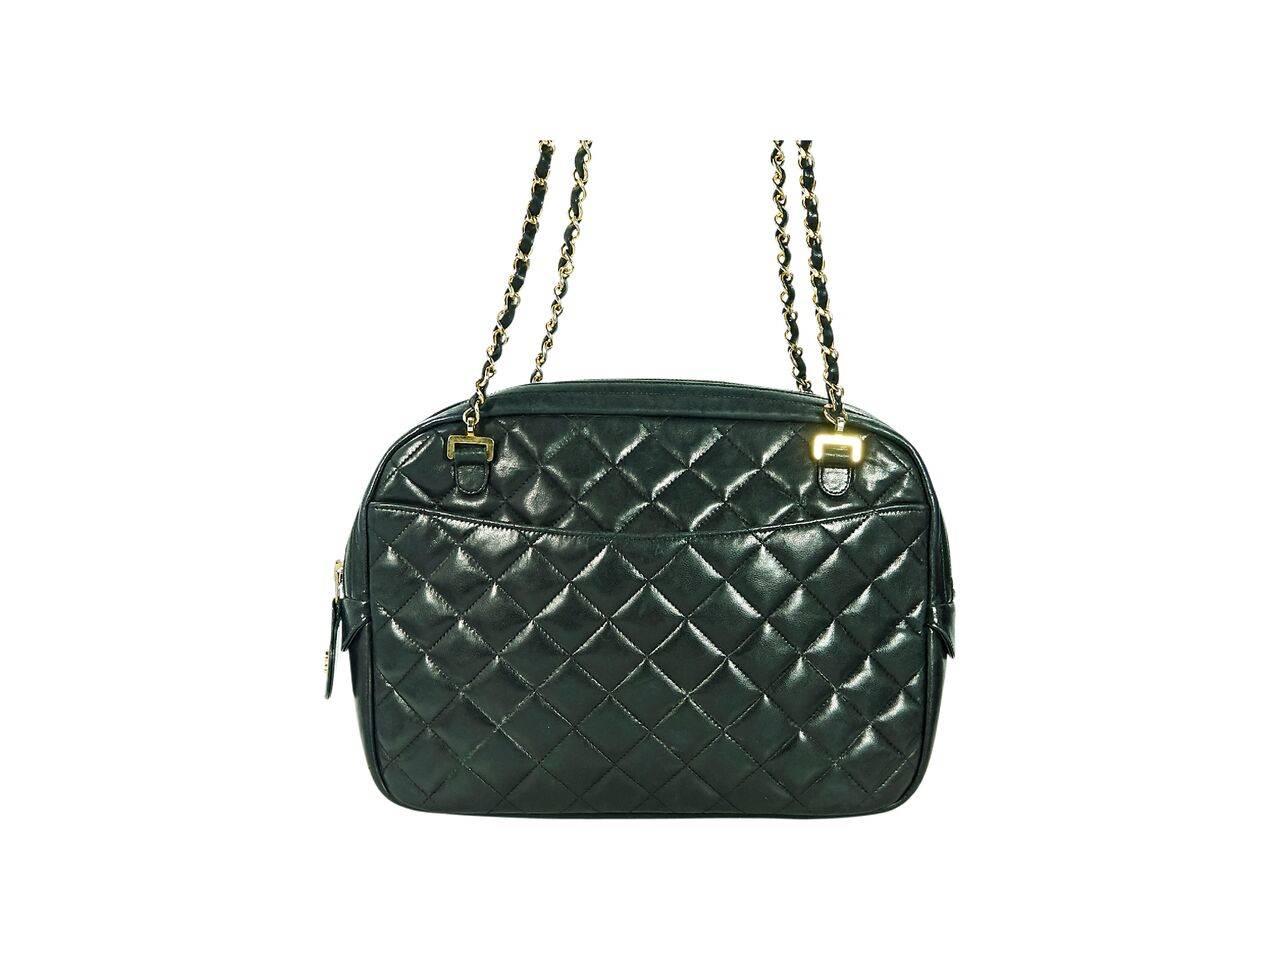 Product details:  Black vintage quilted lambskin leather crossbody bag by Chanel.  Dual crossbody straps.  Top zip closure.  Leather lined interior with inner zip and slide pockets.  Exterior front and back slide pockets.  Goldtone hardware.  